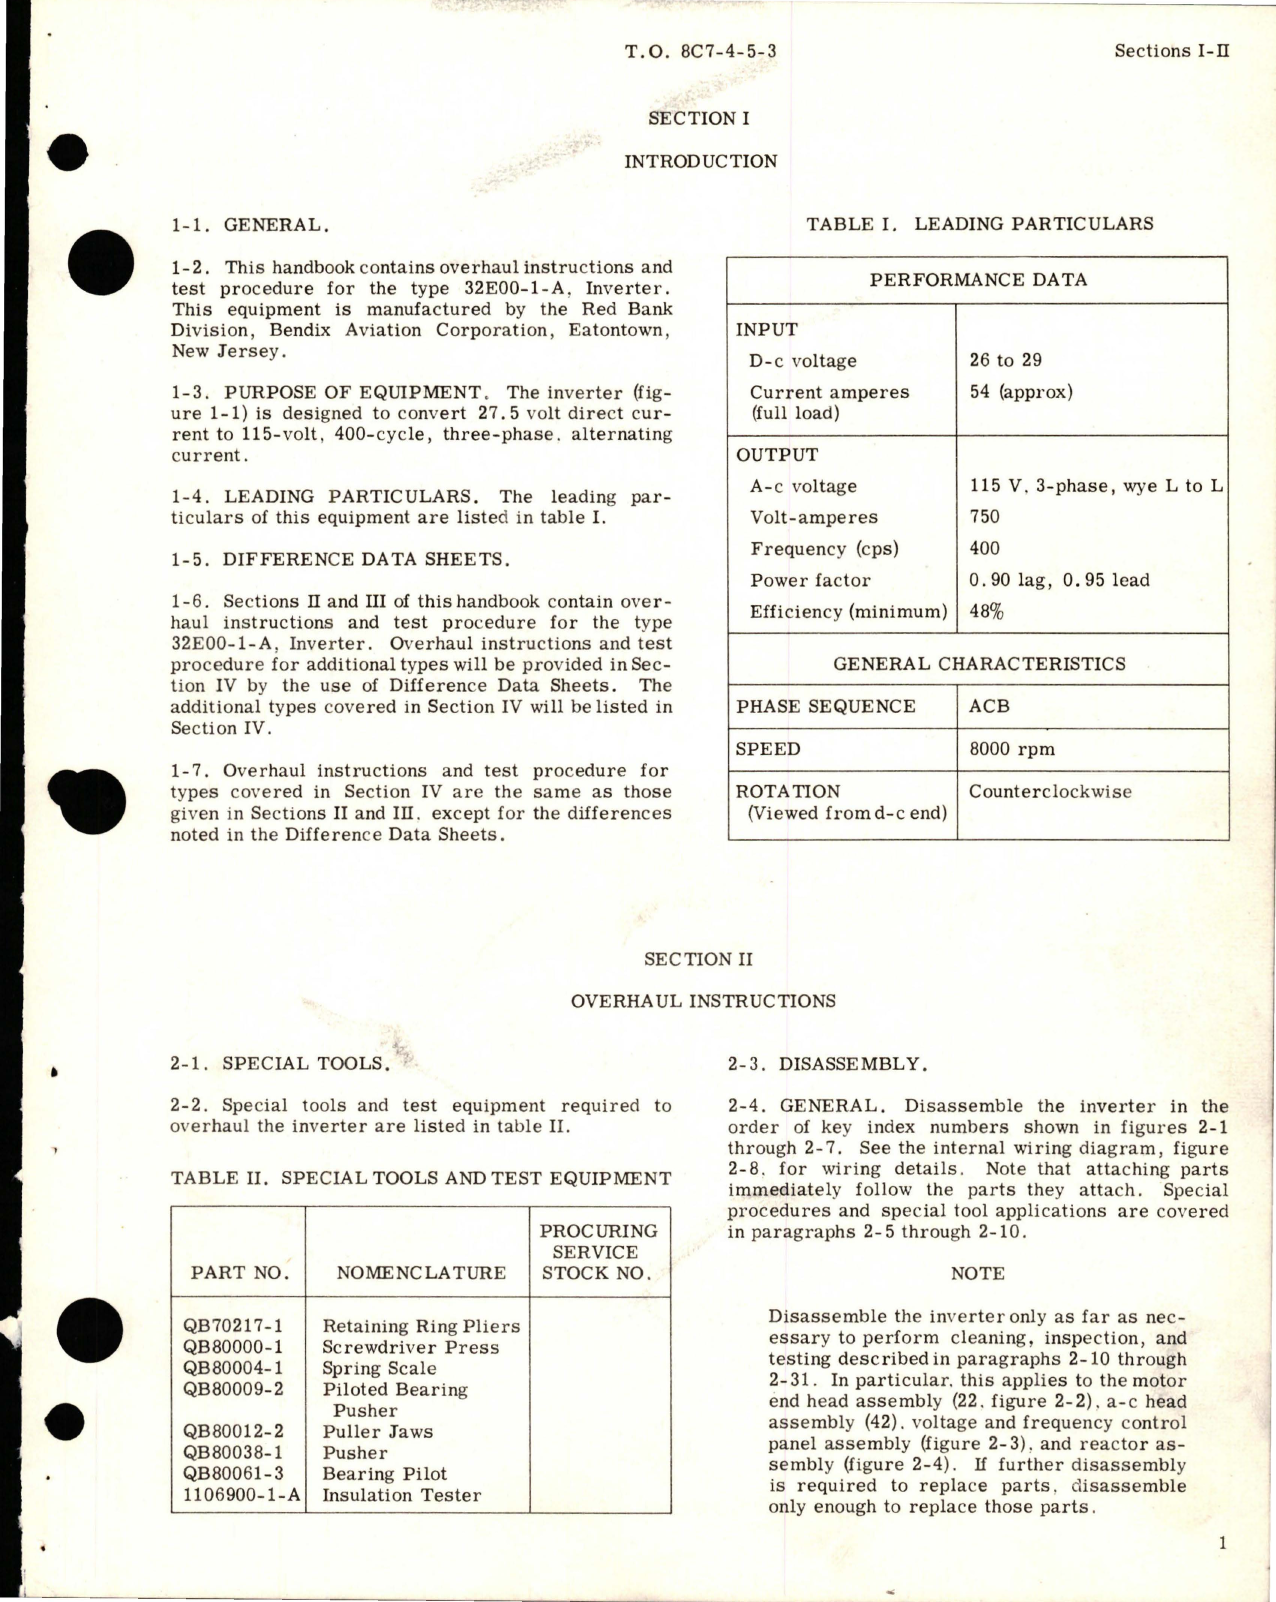 Sample page 5 from AirCorps Library document: Overhaul Instructions for Inverter - Type 32E00-1-A 